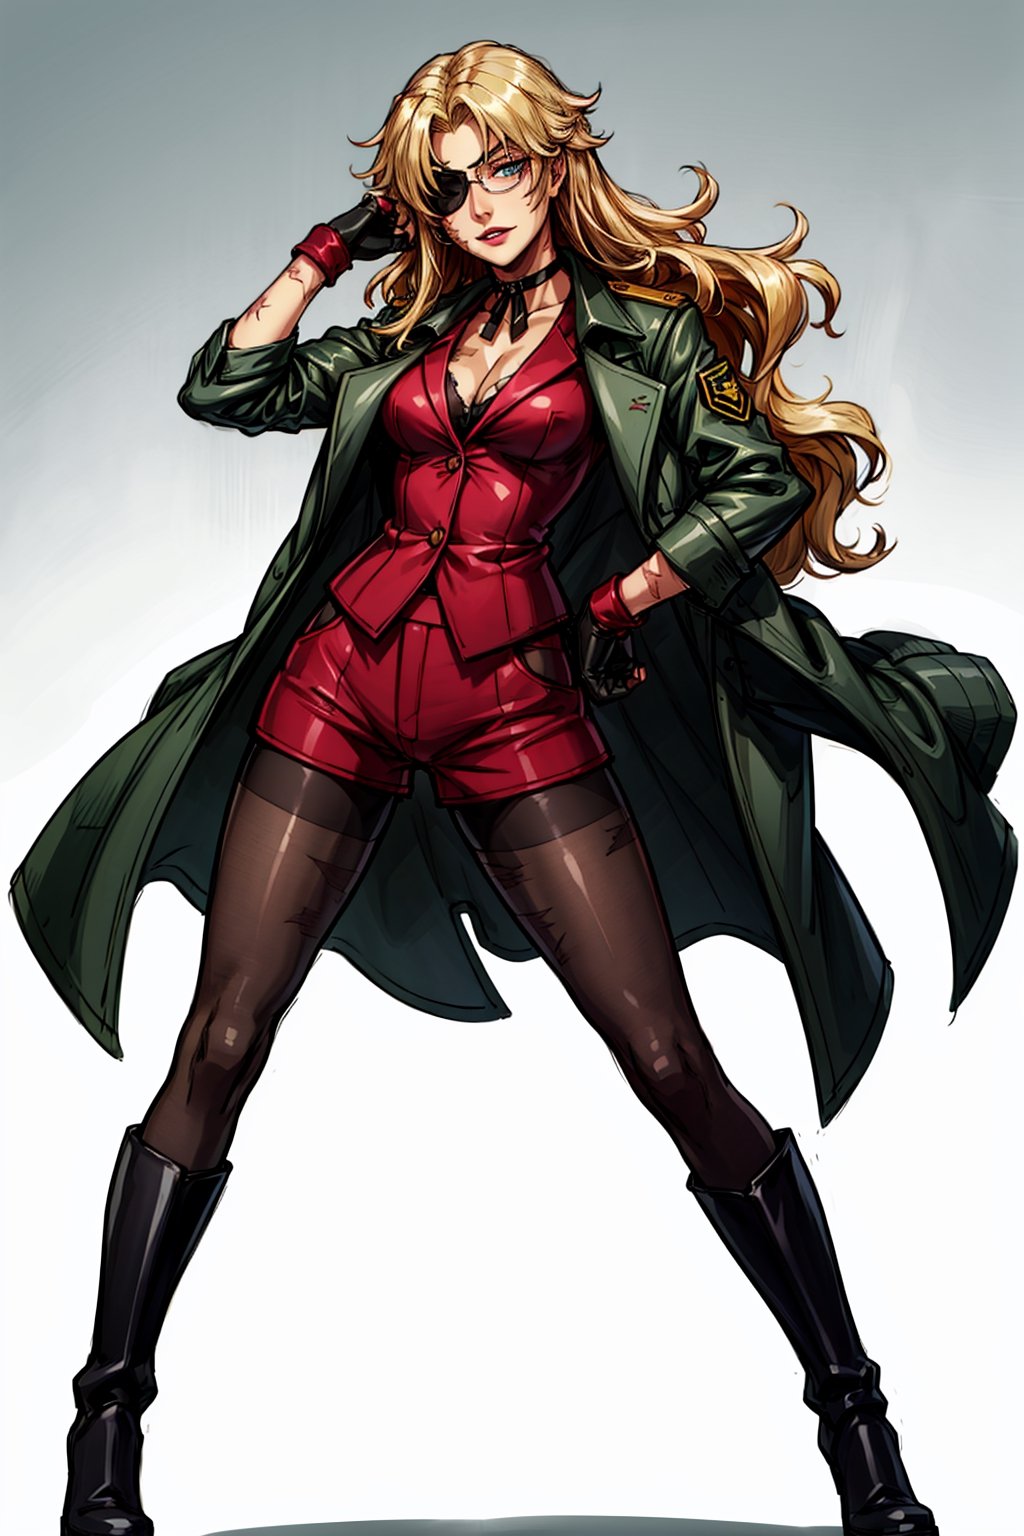 an accurate and detailed full-body shot of a female character named Nicia, 1 girl, Tall and slender, burn scars on the right side of her face and body., medium-length messy blonde hair, Piercing blue eyes, Eyepatch over her right eye, (wine-colored vest), black chino shorts, ((Black pantyhose)), boots, red ribbon choker, Rose-colored lipstick, green military coat draped over shoulders, masterpiece, high quality, 4K, balalaika, blonde hair, eyepatch, glasses, red vest, ribbon choker, burn scars, black pants, brown high boots, fingerless gloves,